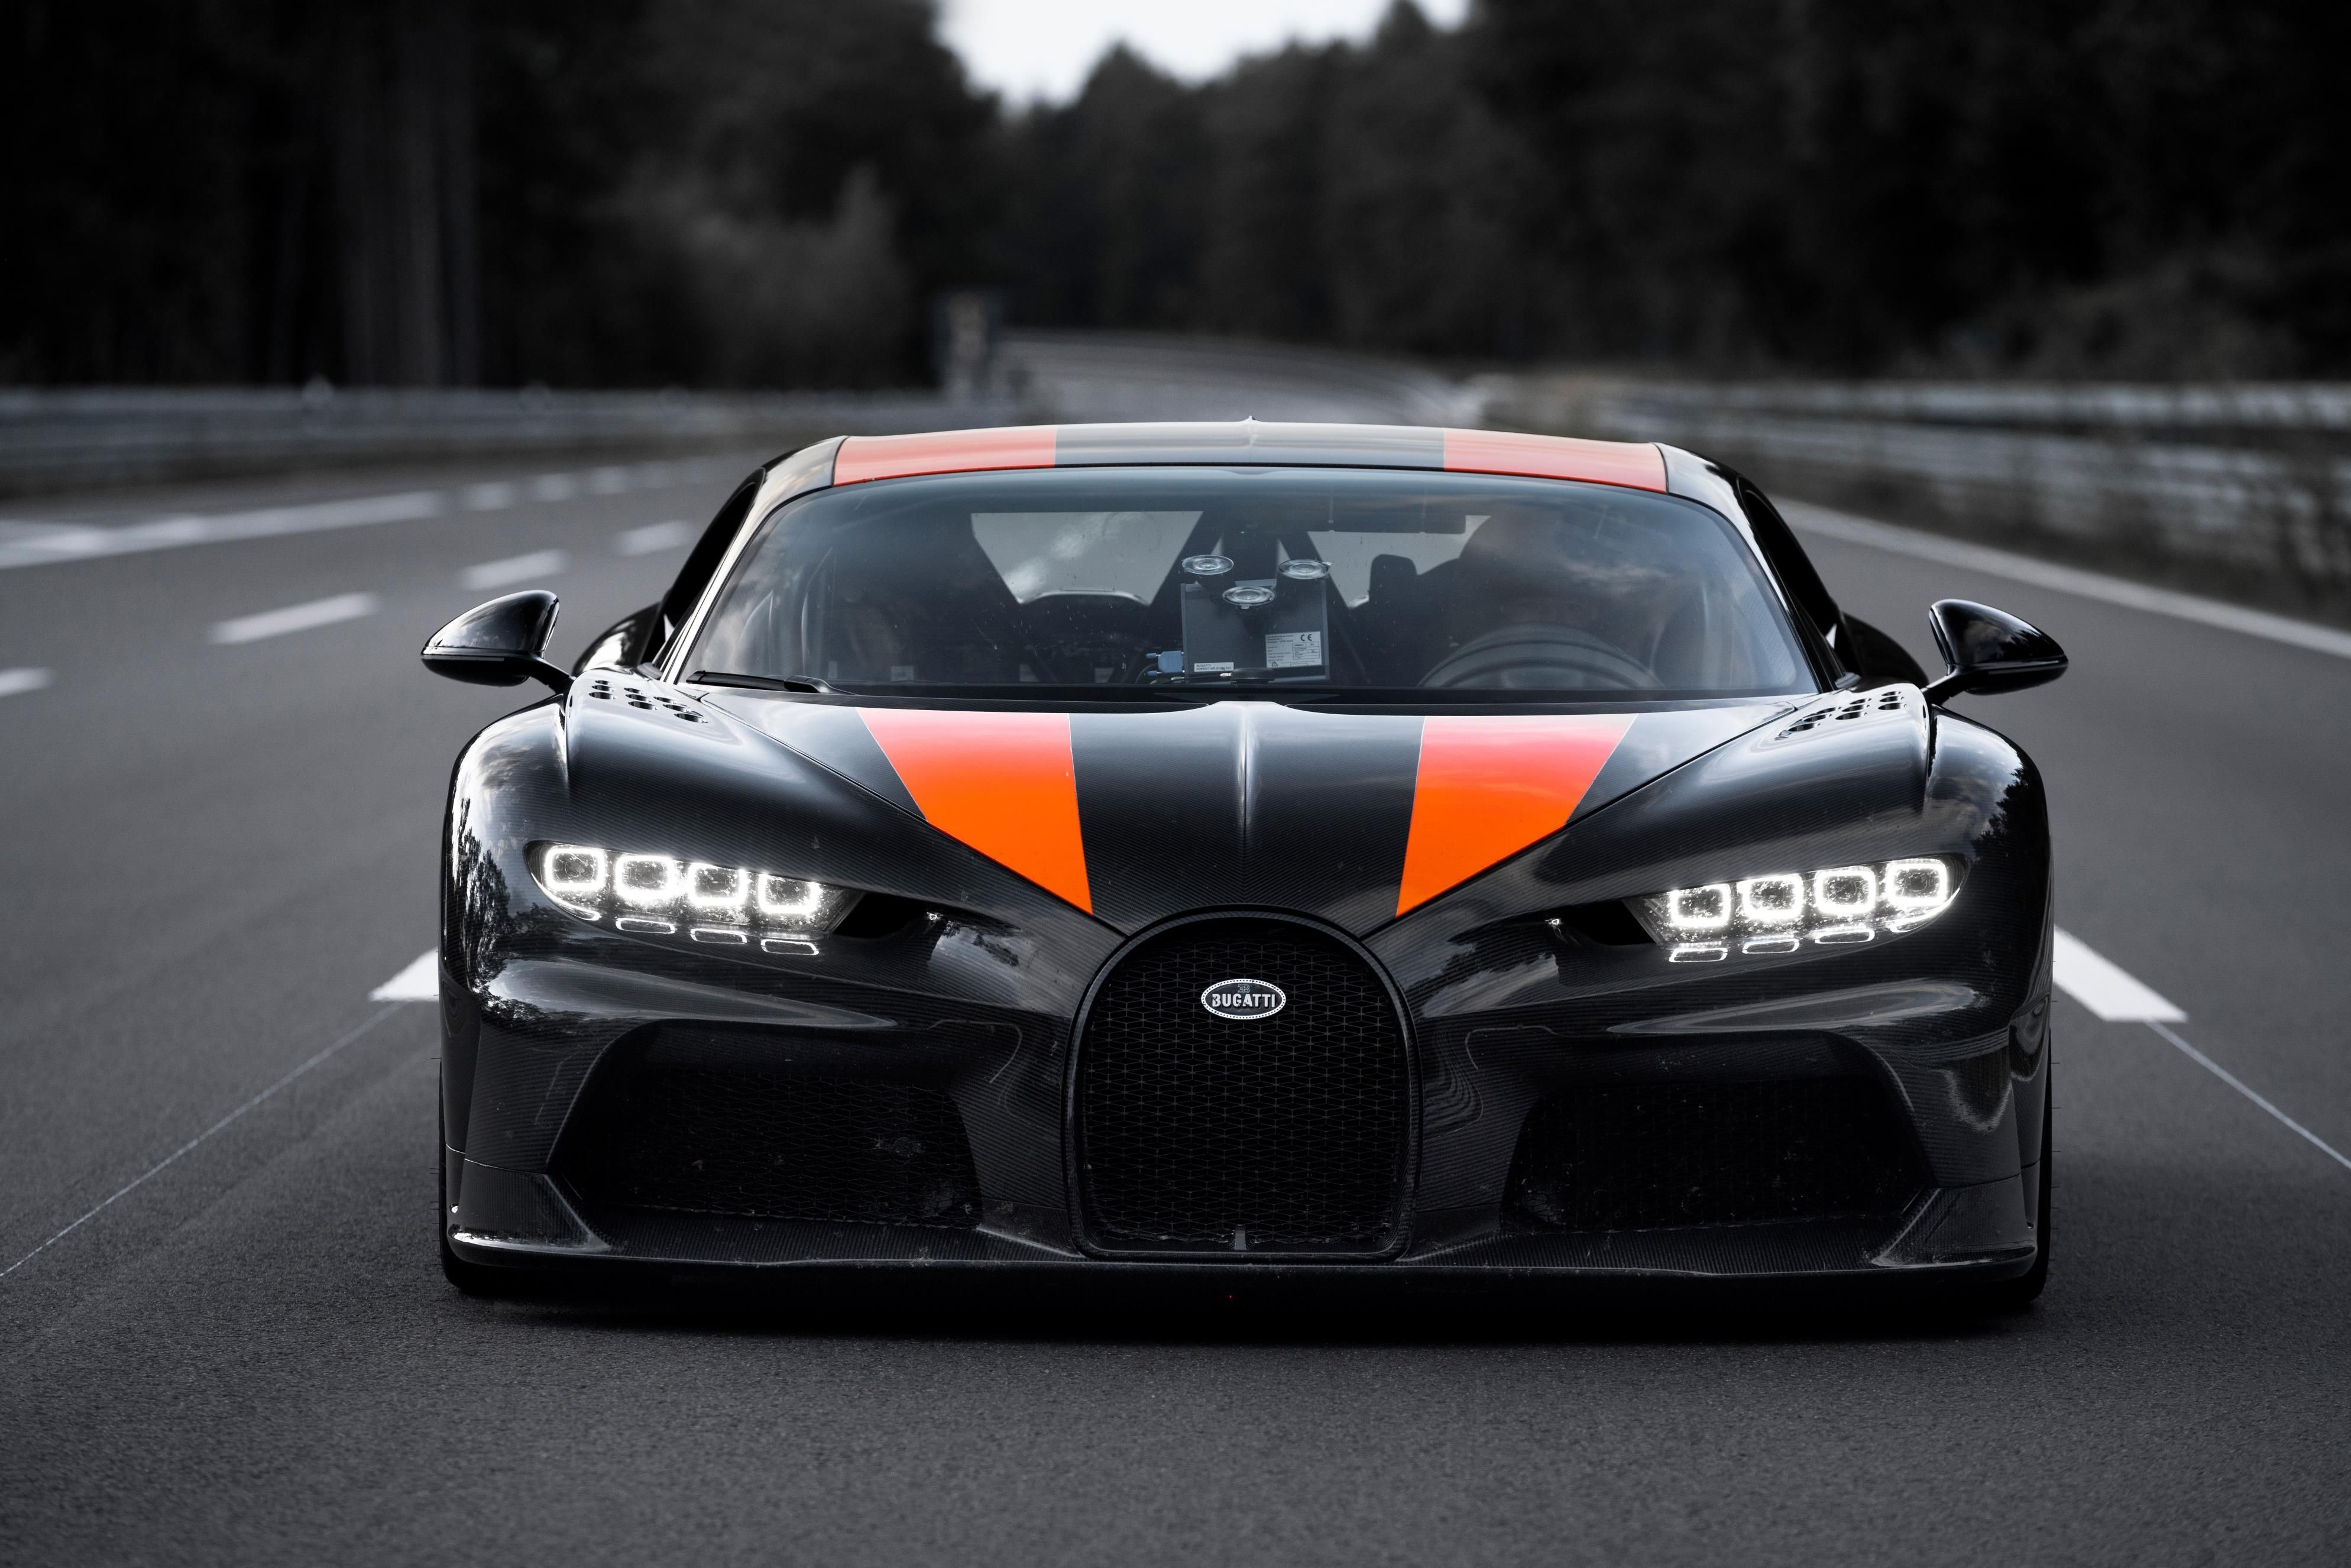 38 Fastest Cars in the World, Ranked - Road & Track